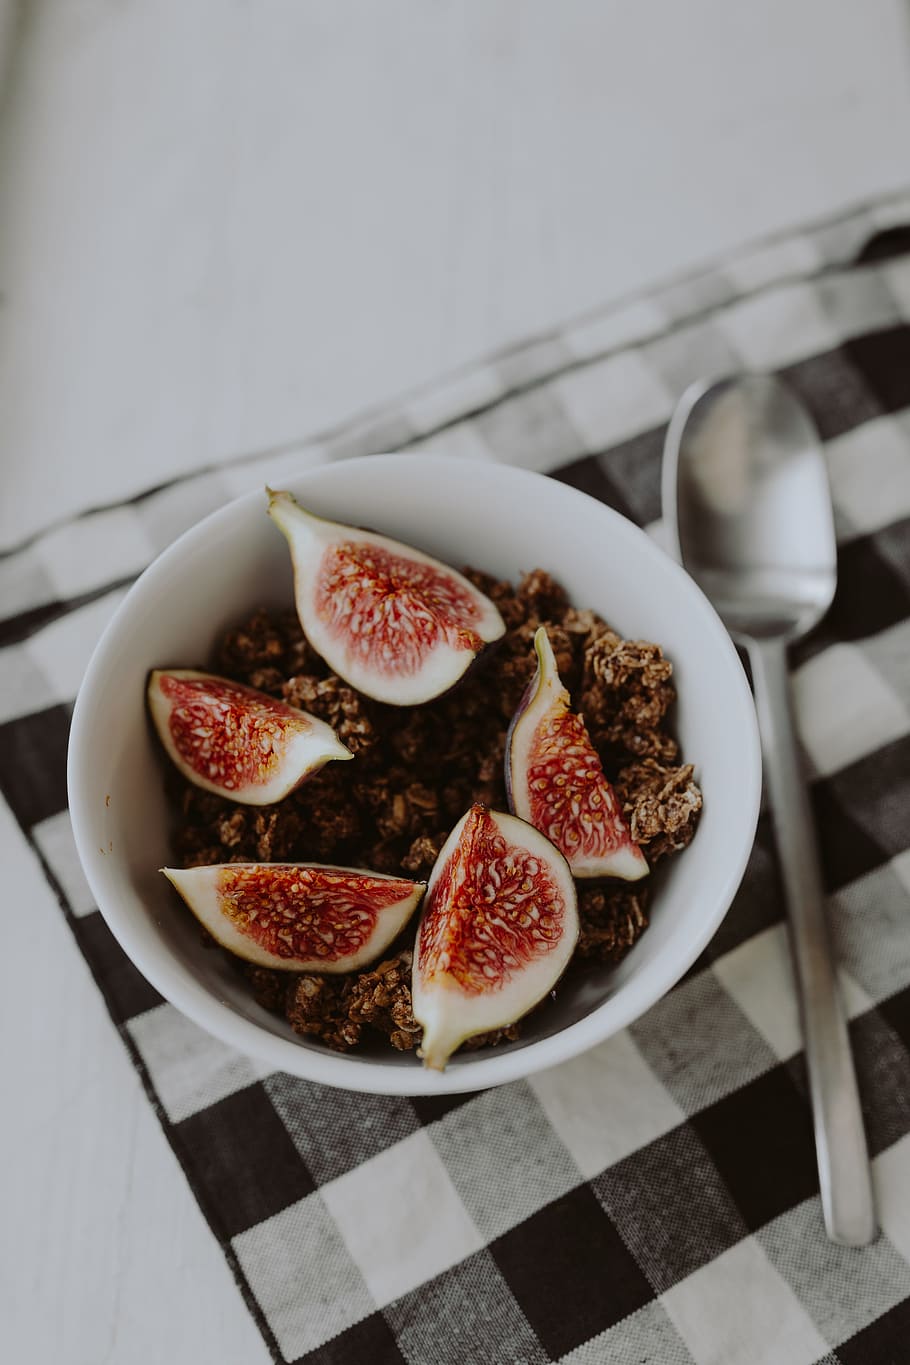 Bowl of crunchy granola and figs, breakfast, fruits, meal, morning